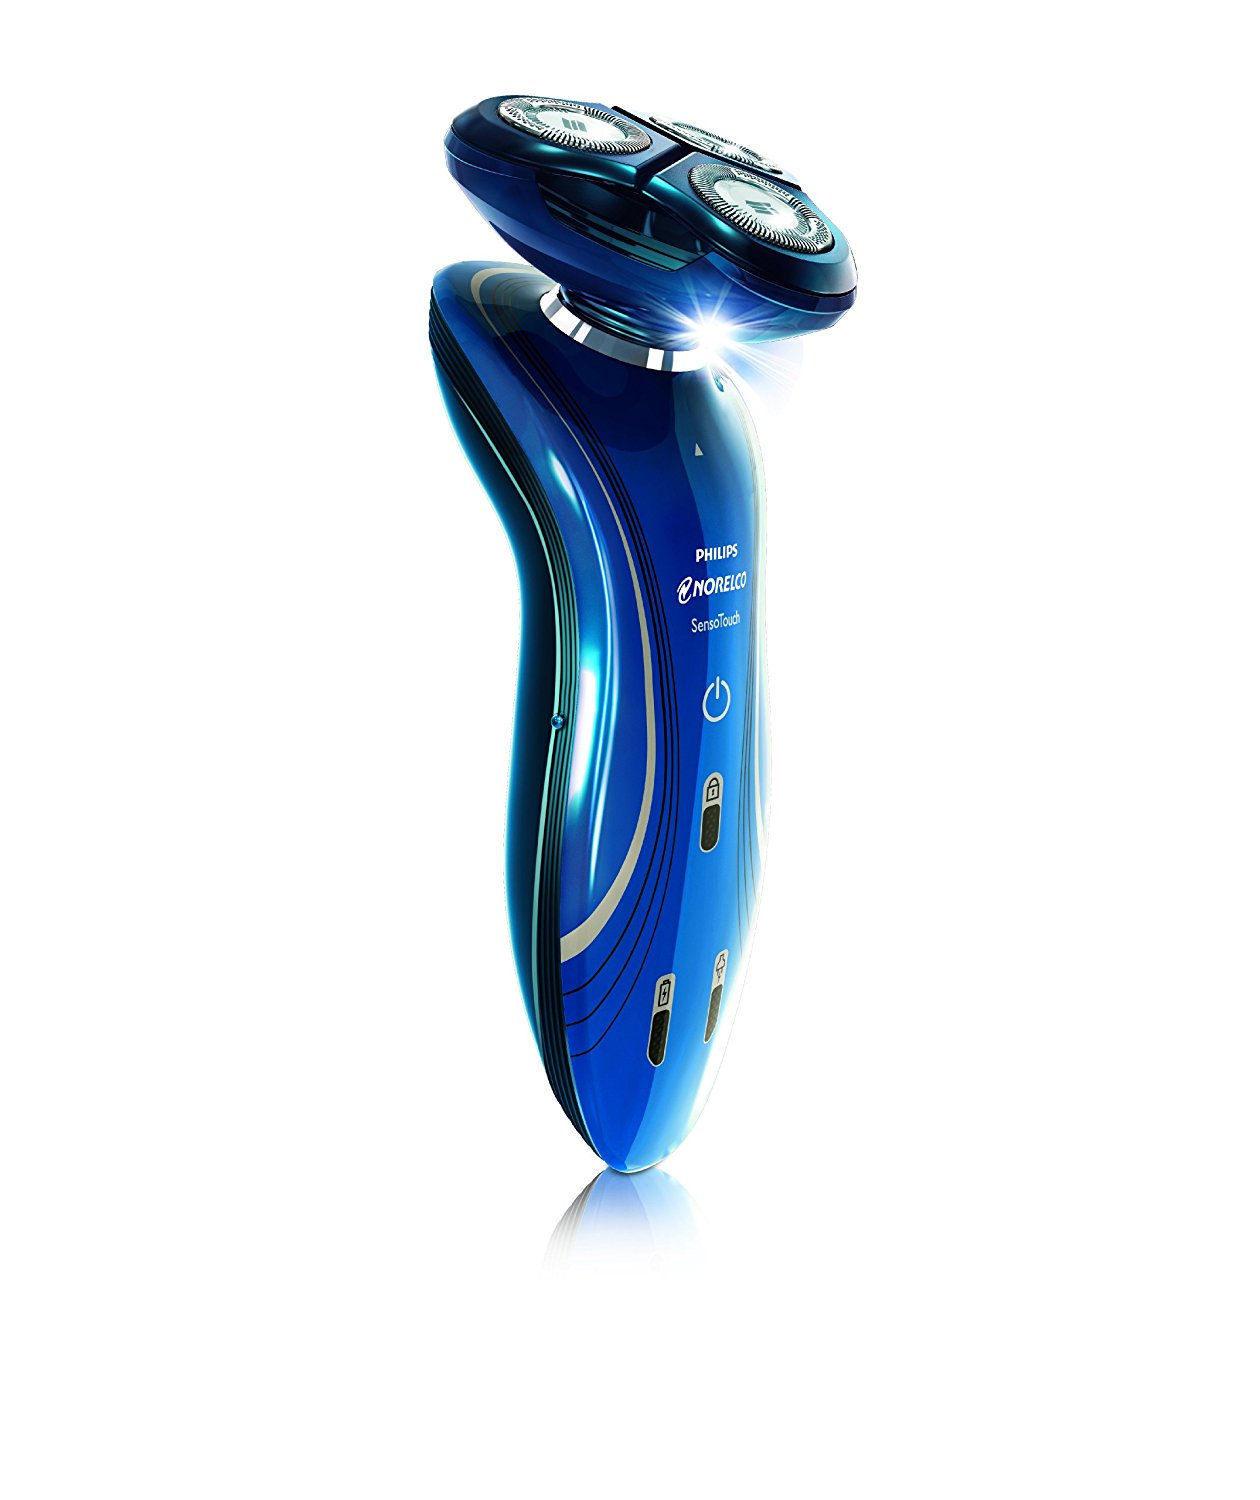 Philips Norelco Electric Men's Electric Shaver 6100, 1150X/40 - image 2 of 7